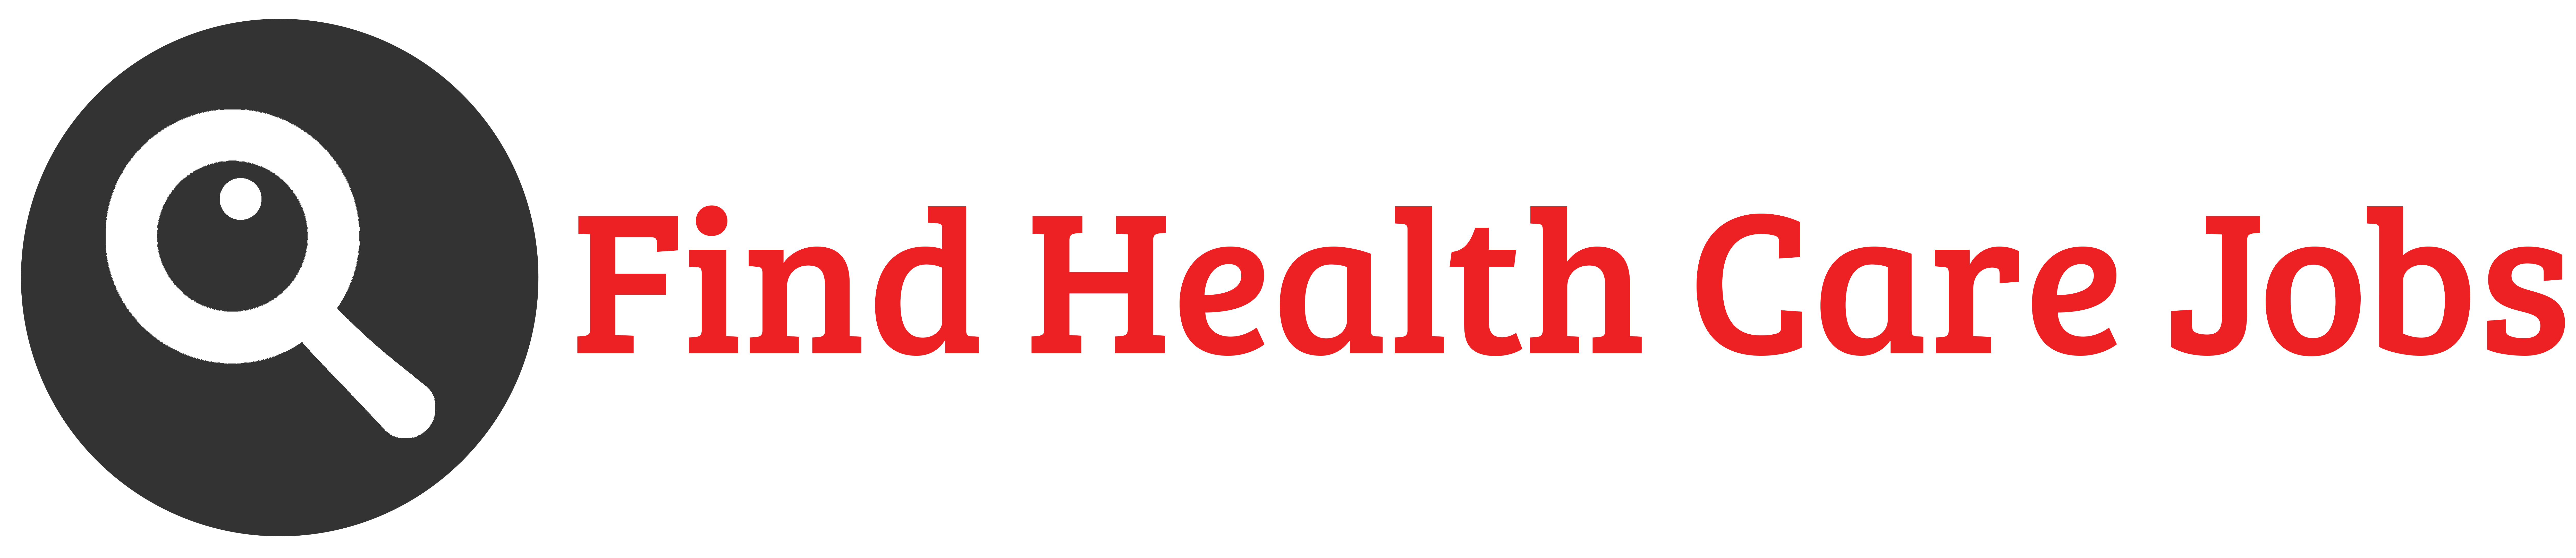 Find Health Care Jobs